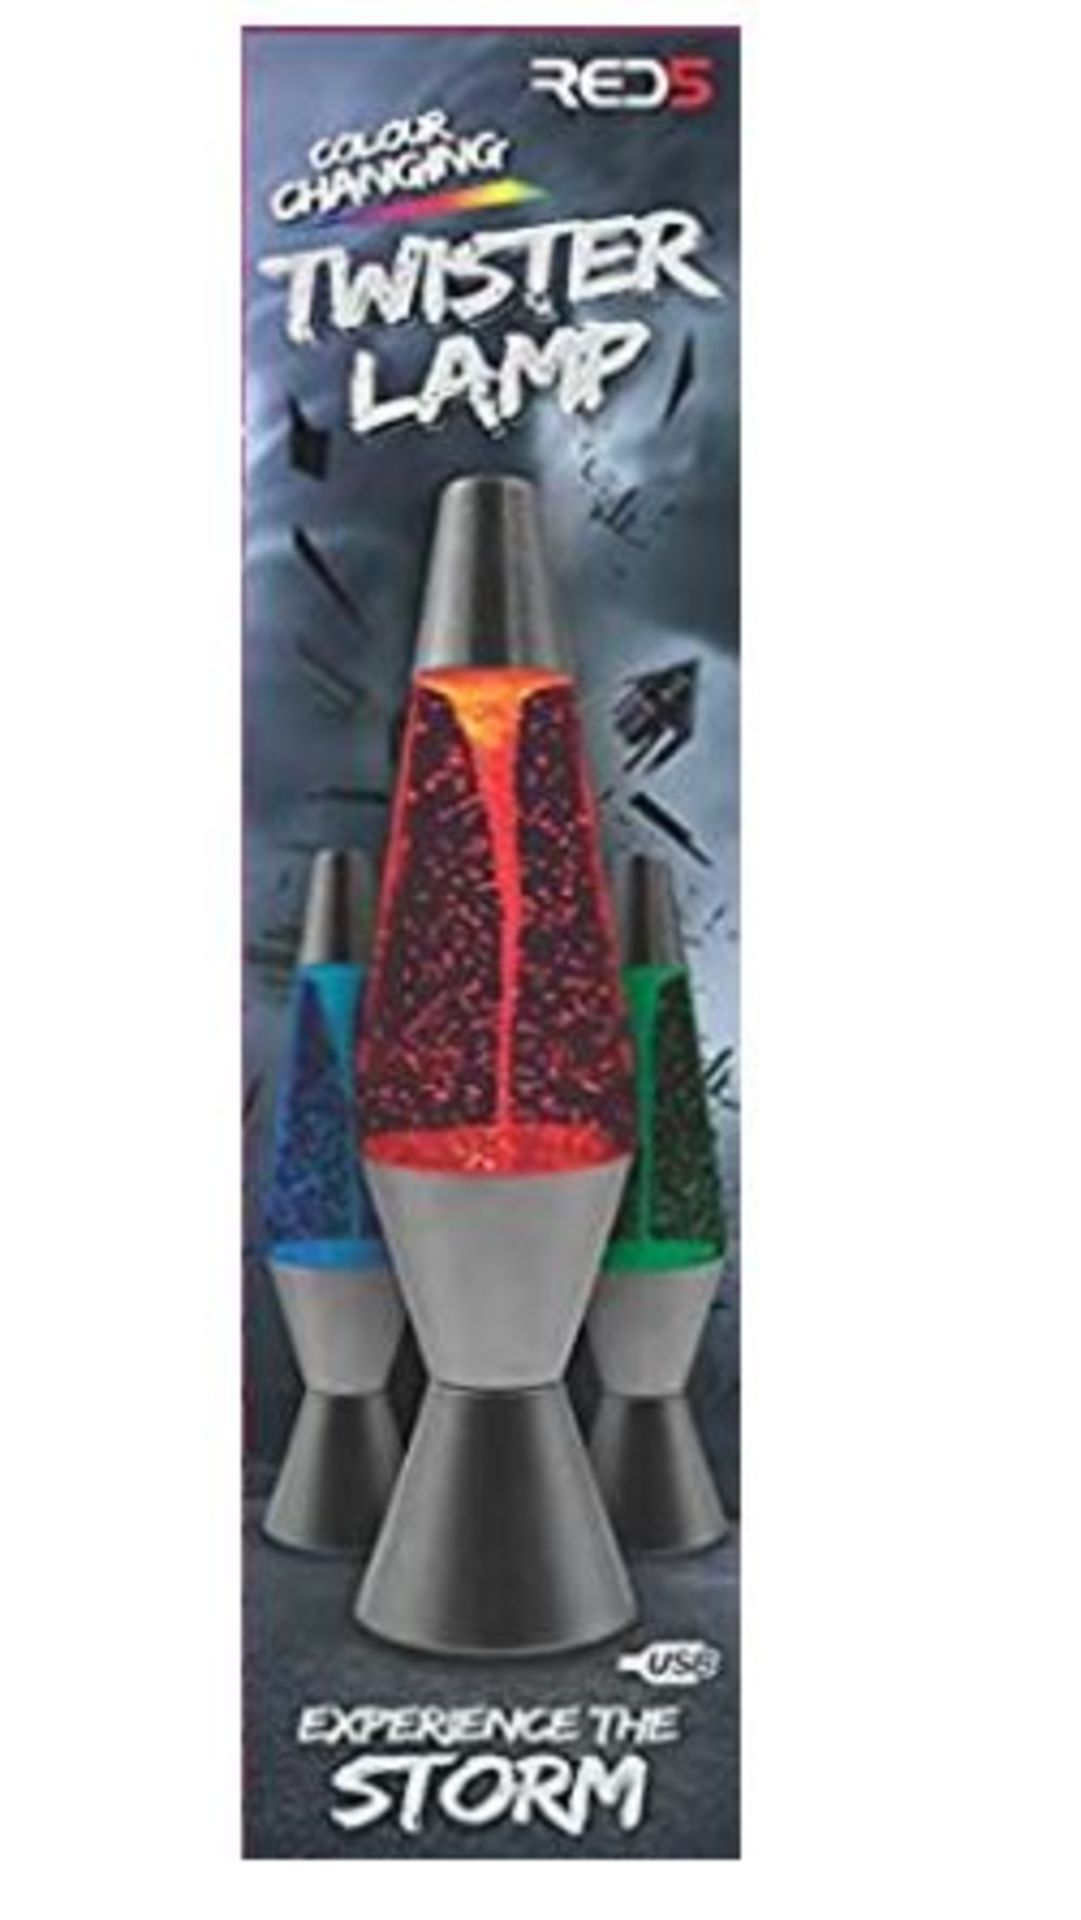 5x Red5 Colour Changing Twister Lamp RRP £14.99 Each. (Units Have RTM Sticker) - Image 2 of 5